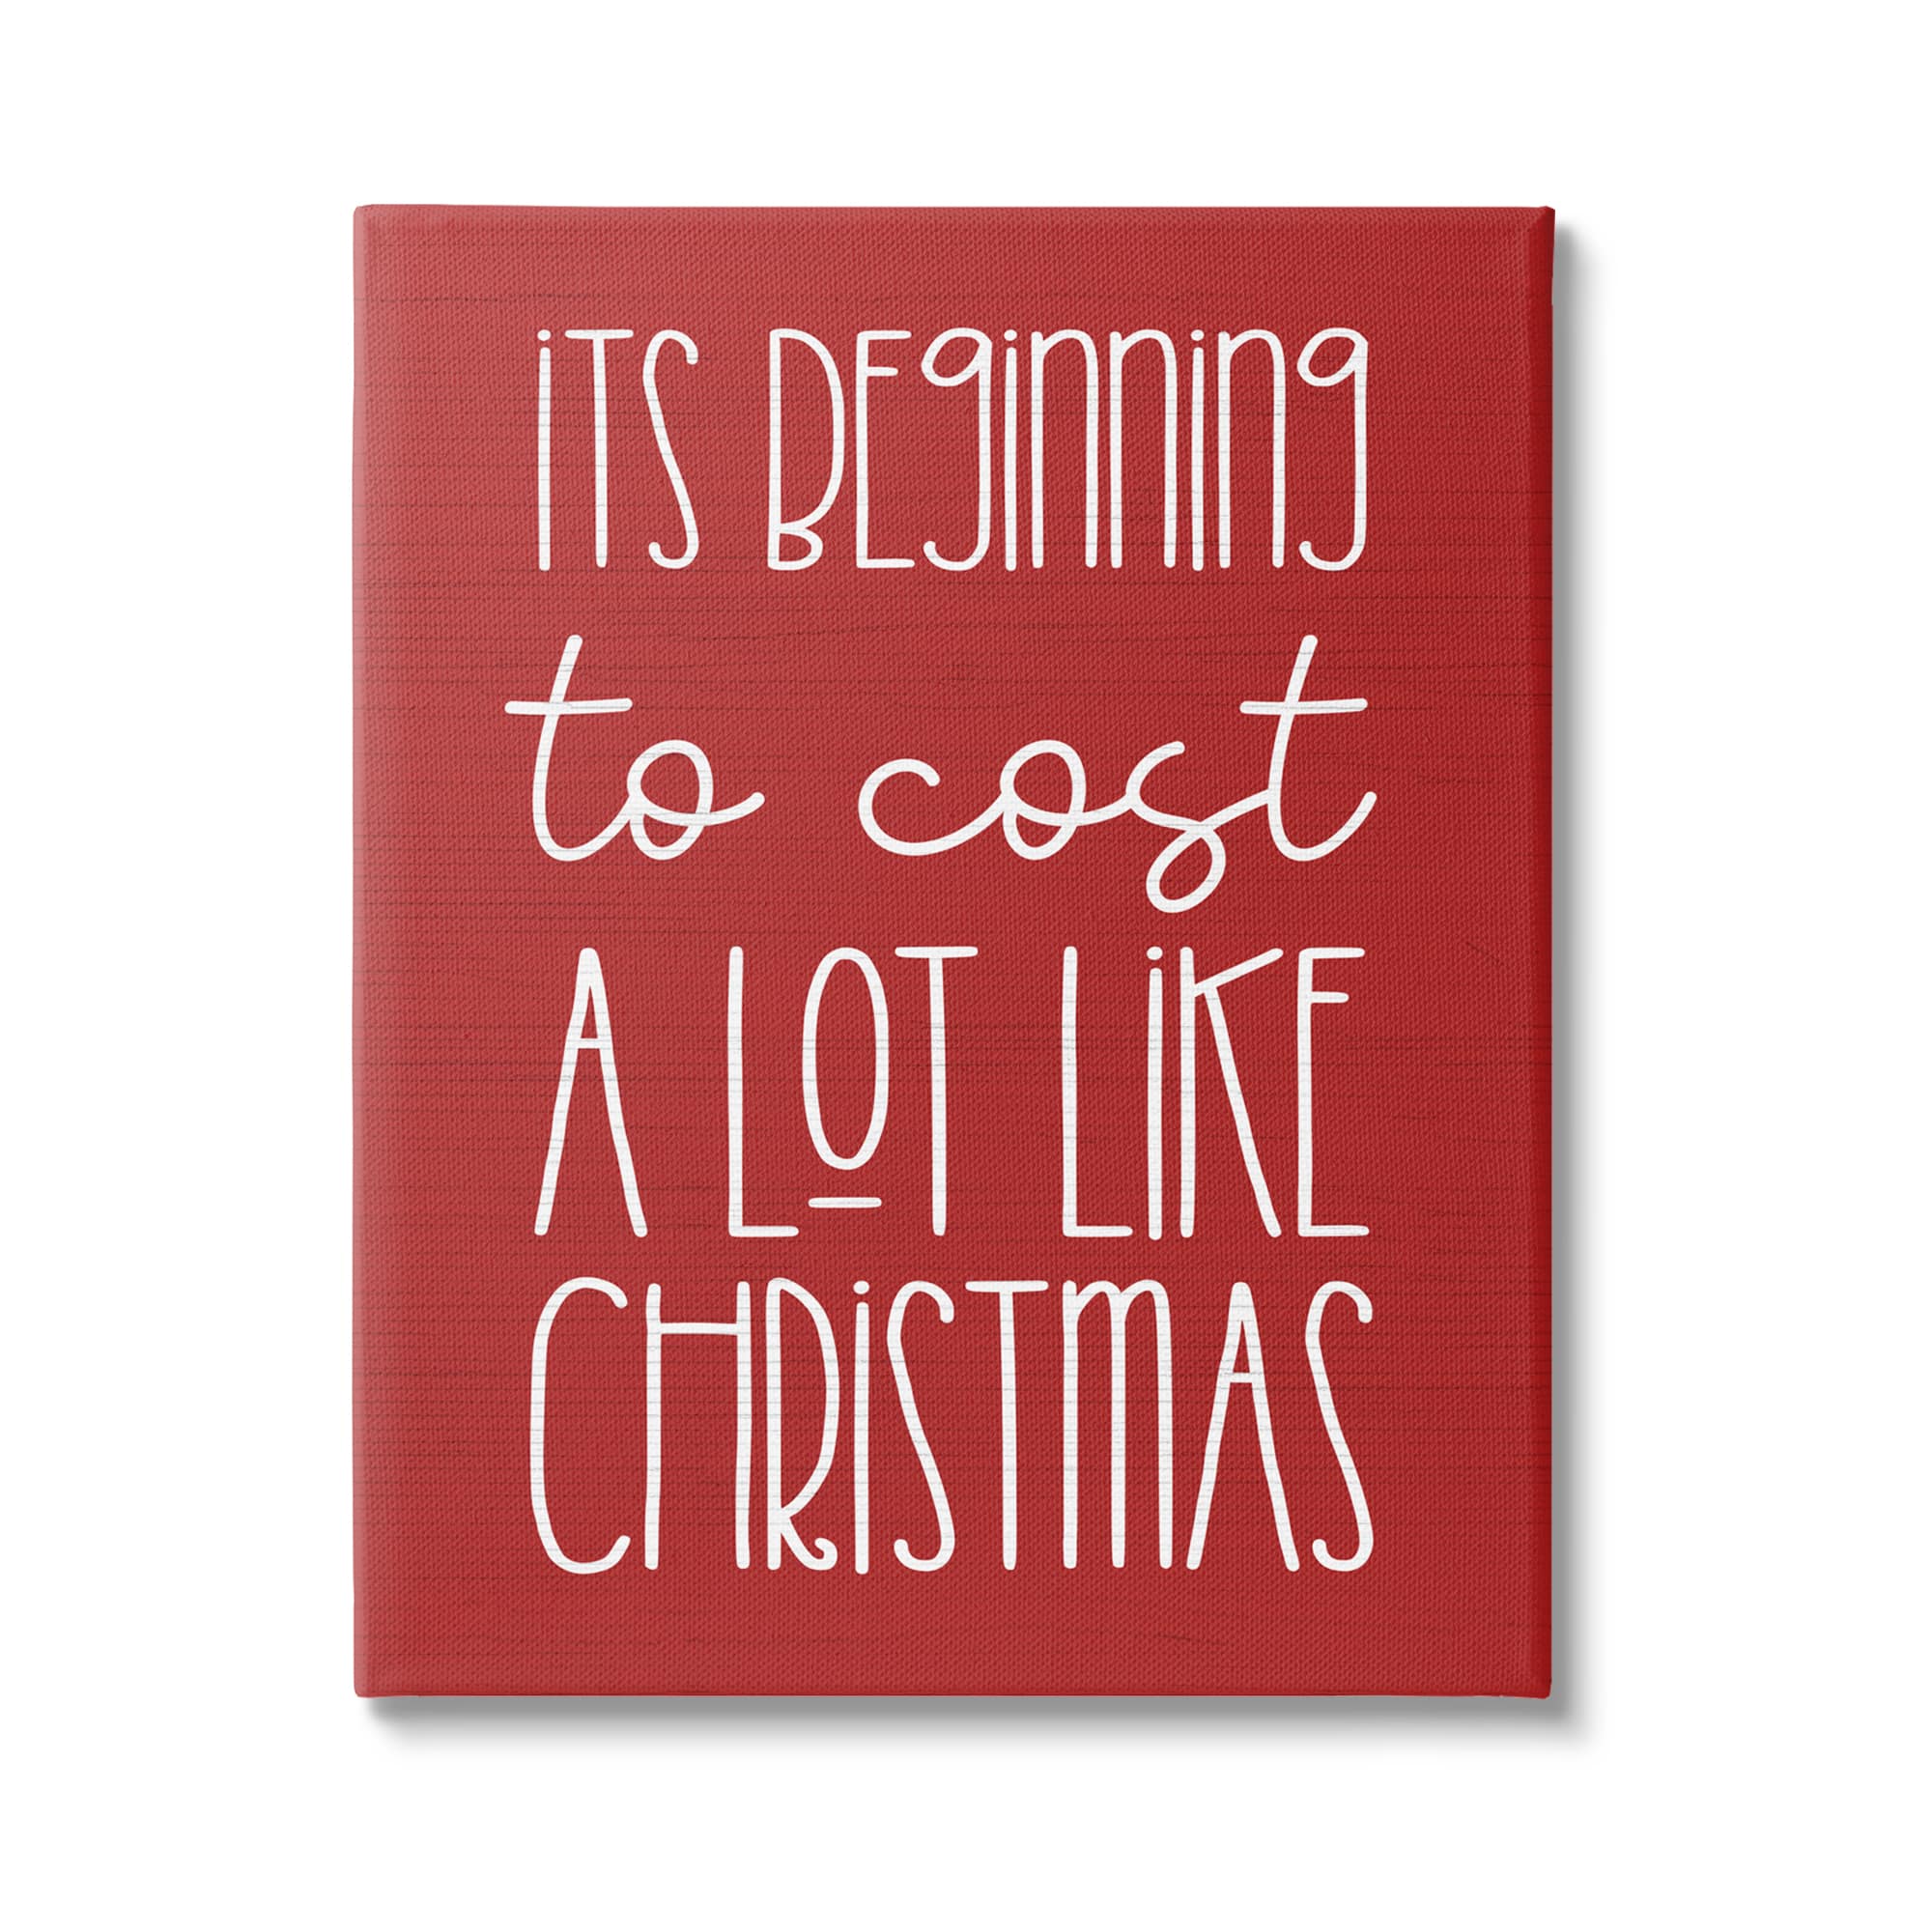 Stupell Industries Cost A Lot Like Christmas Funny Phrase Canvas Wall Art